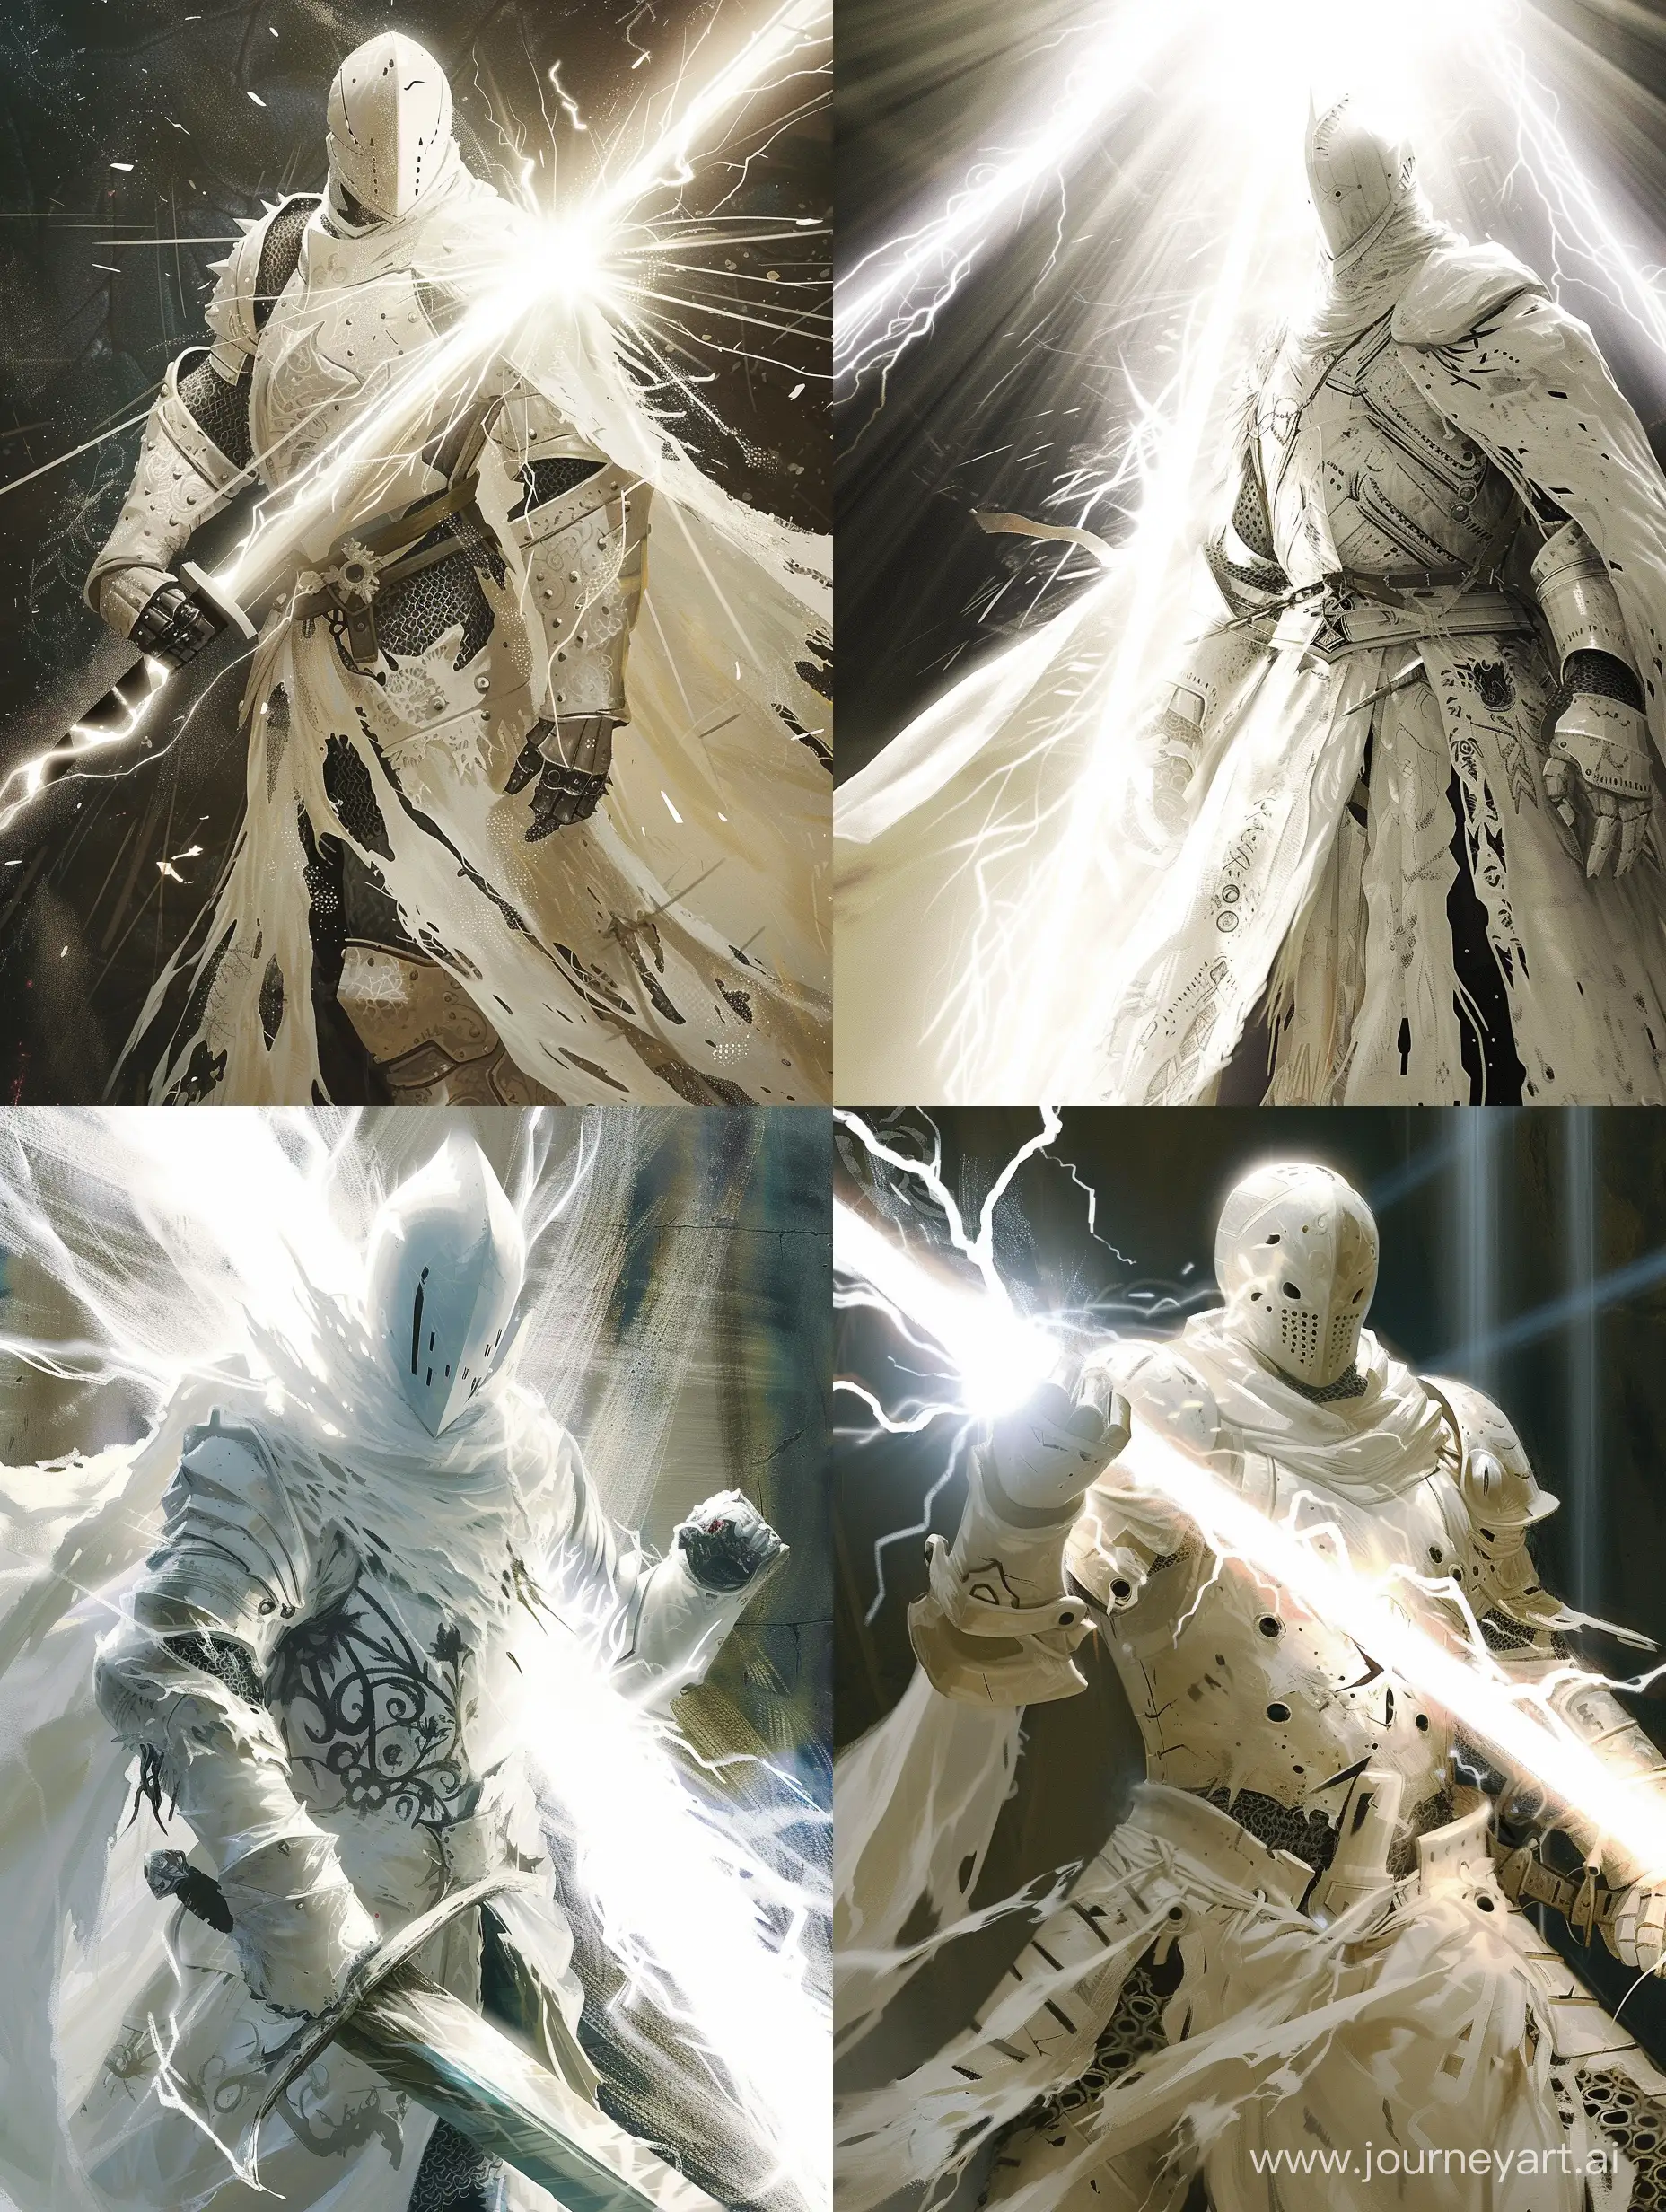 Radiant-Knight-in-White-Armor-Battling-Darkness-with-Dazzling-Light